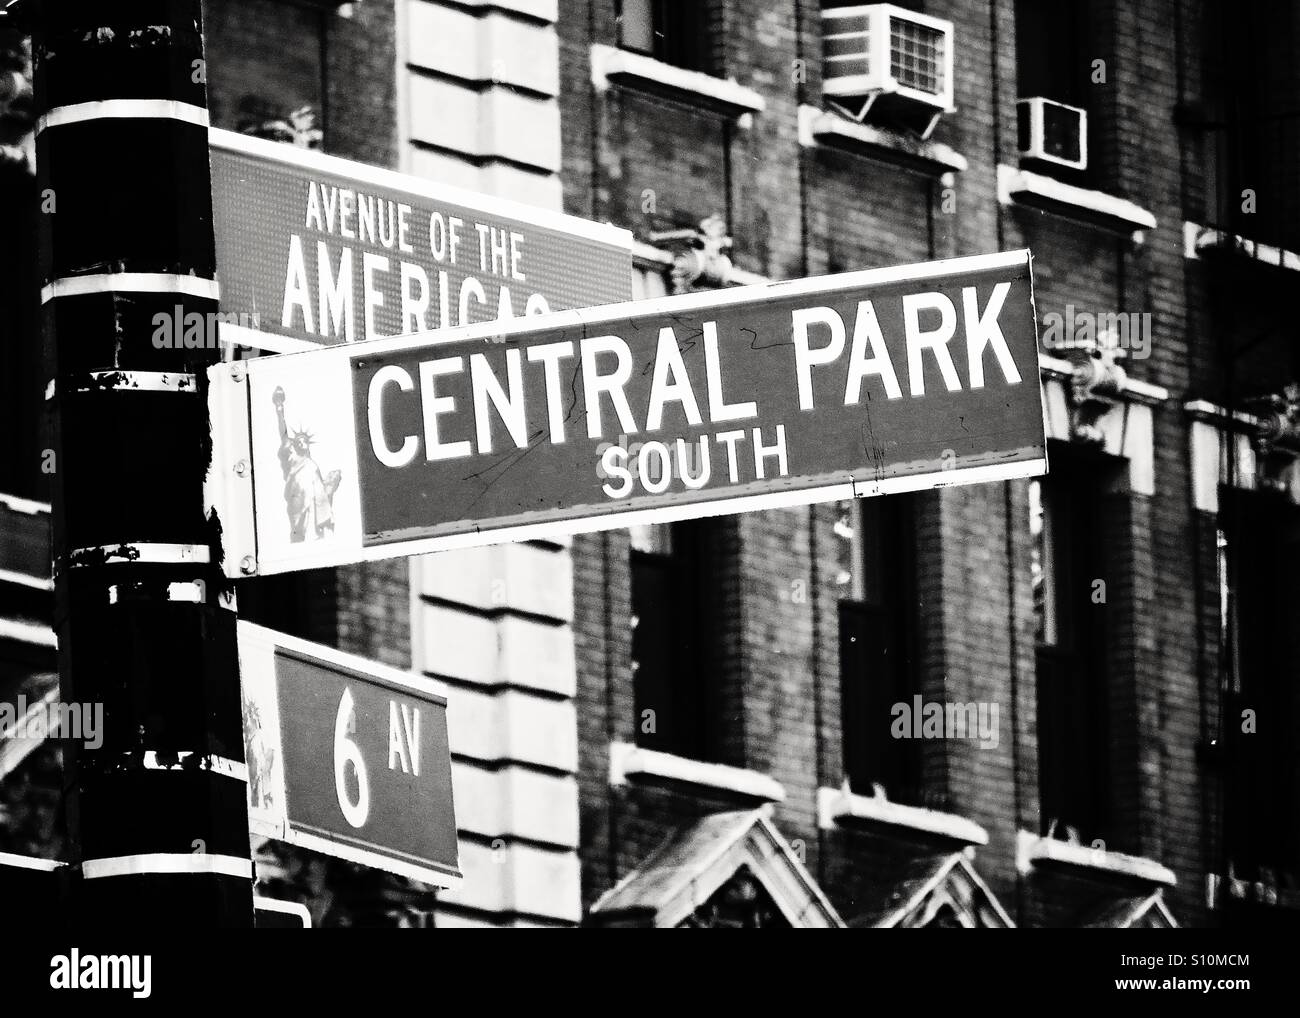 Central Park south street sign Stock Photo